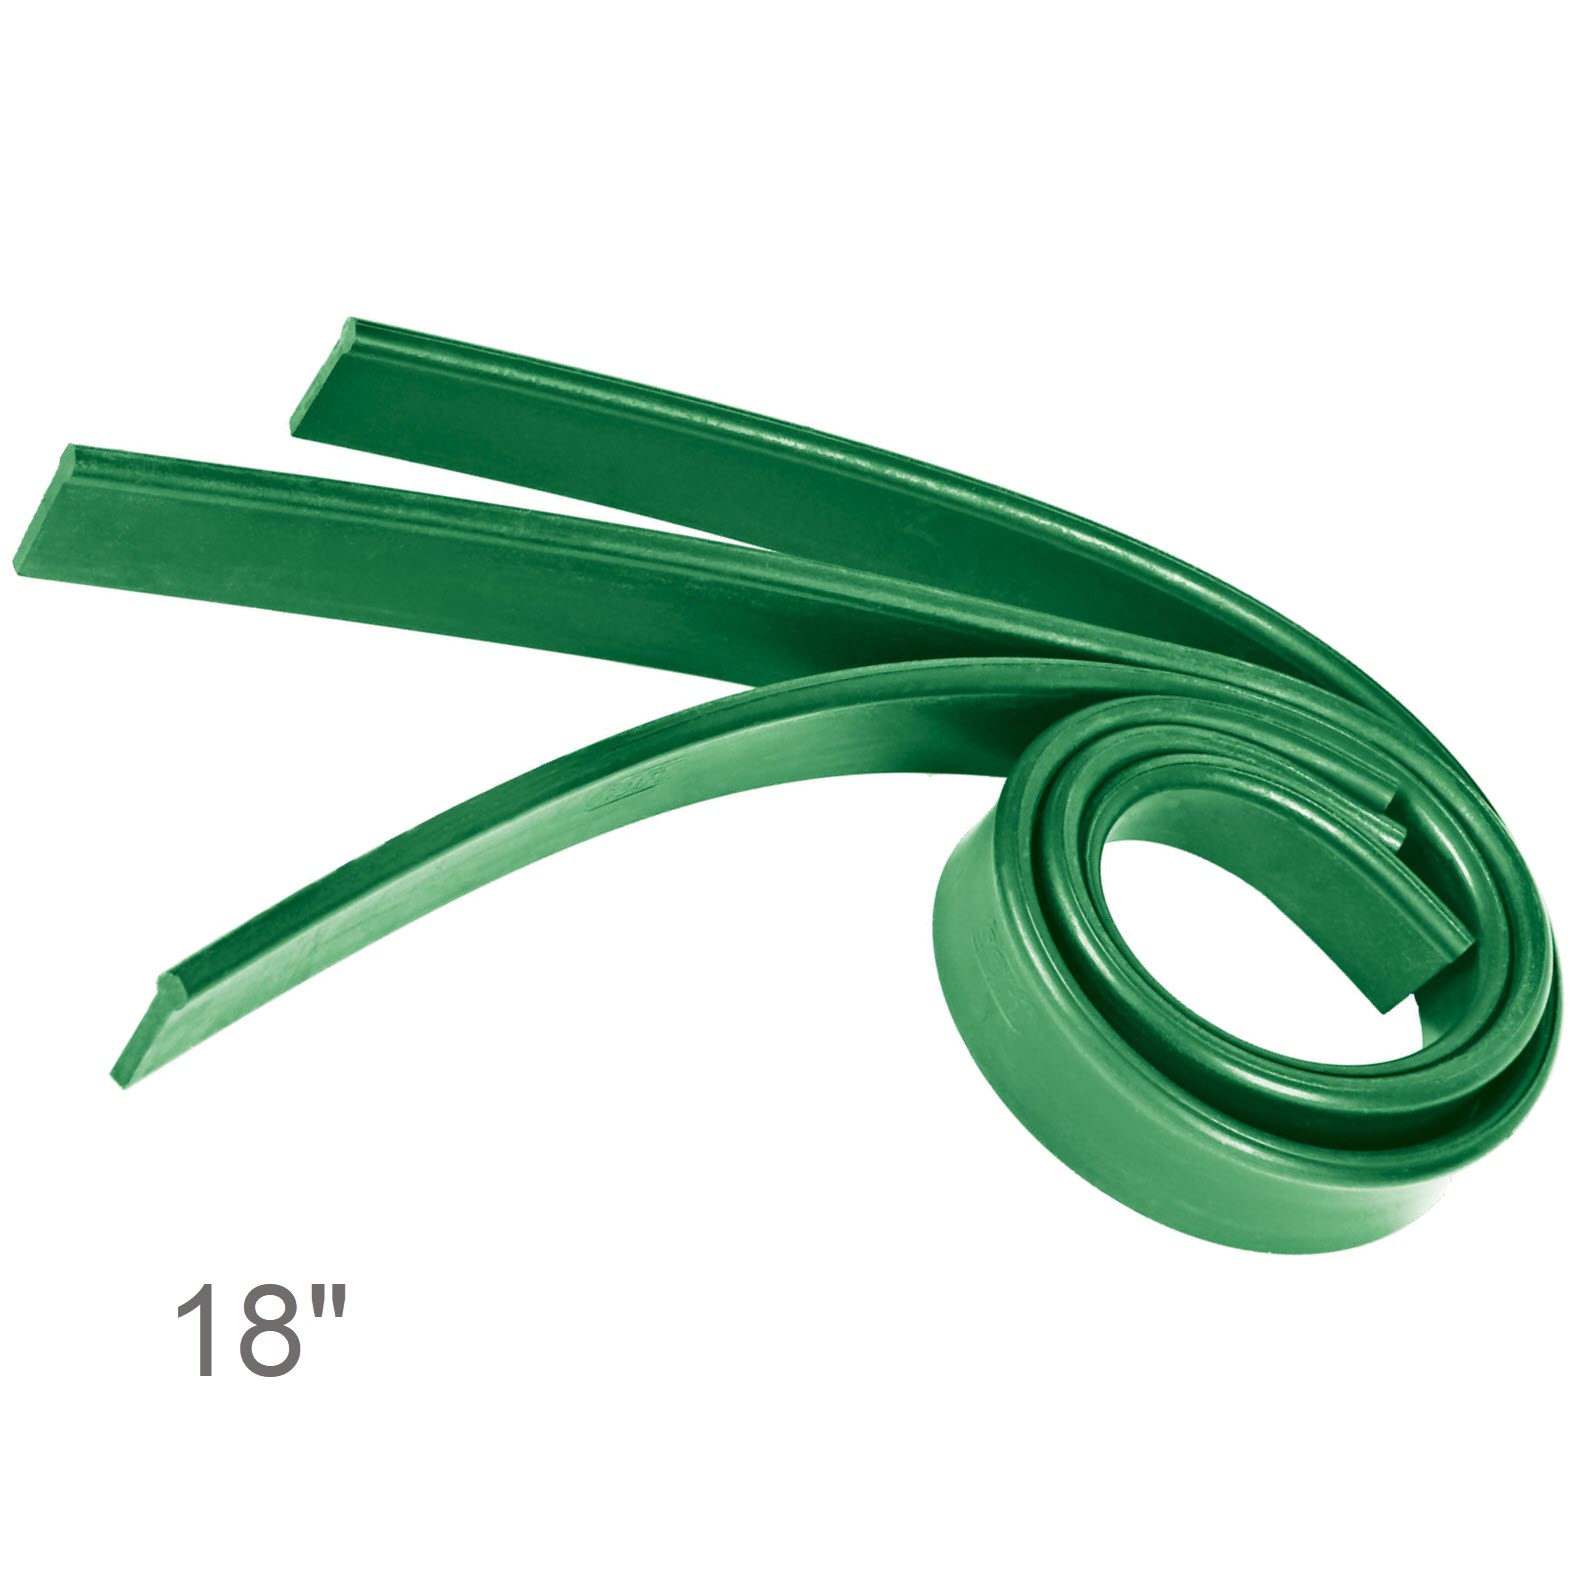 Power Rubber Green 18in (10 Pack) Unger (03-21824): Rubber Replacement